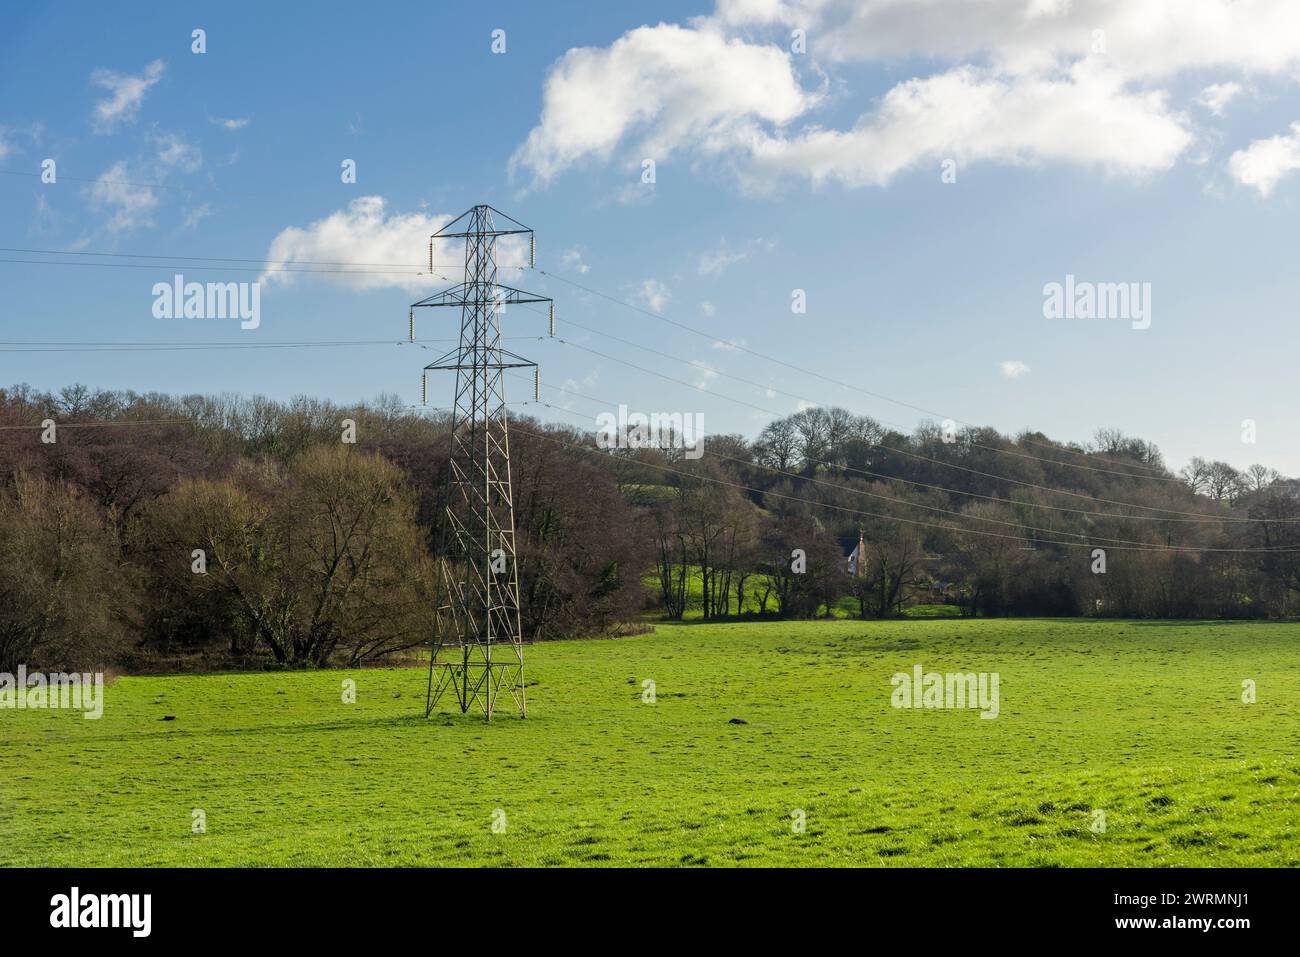 Overhead 132kv electricity transmission cables and transmission tower in the countryside near Stogumber, Somerset, England. Stock Photo